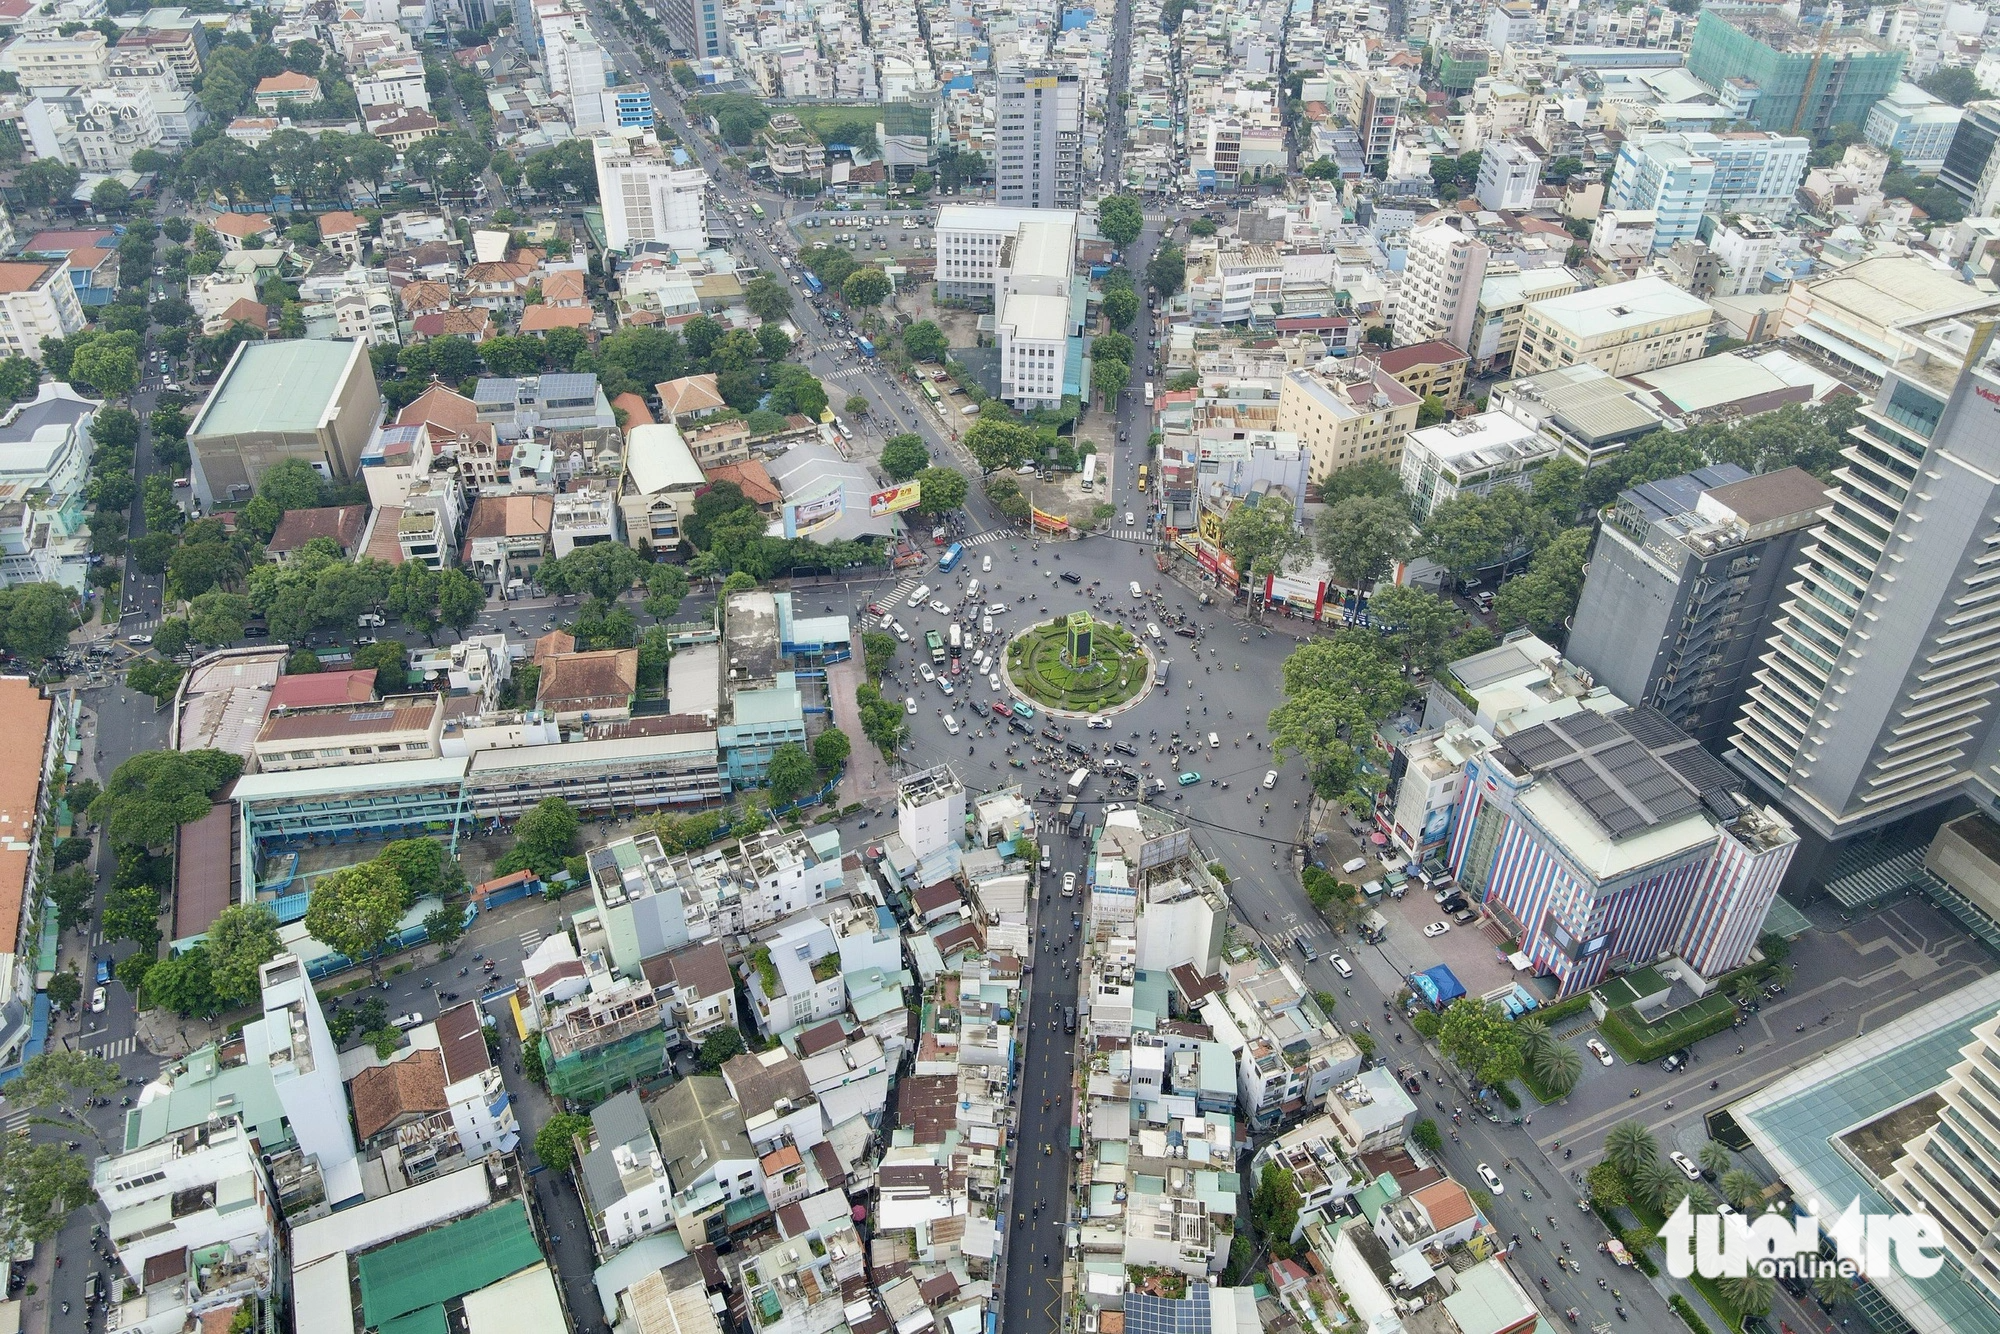 Overpass construction at Ho Chi Minh City’s Dan Chu Roundabout back on table after a decade